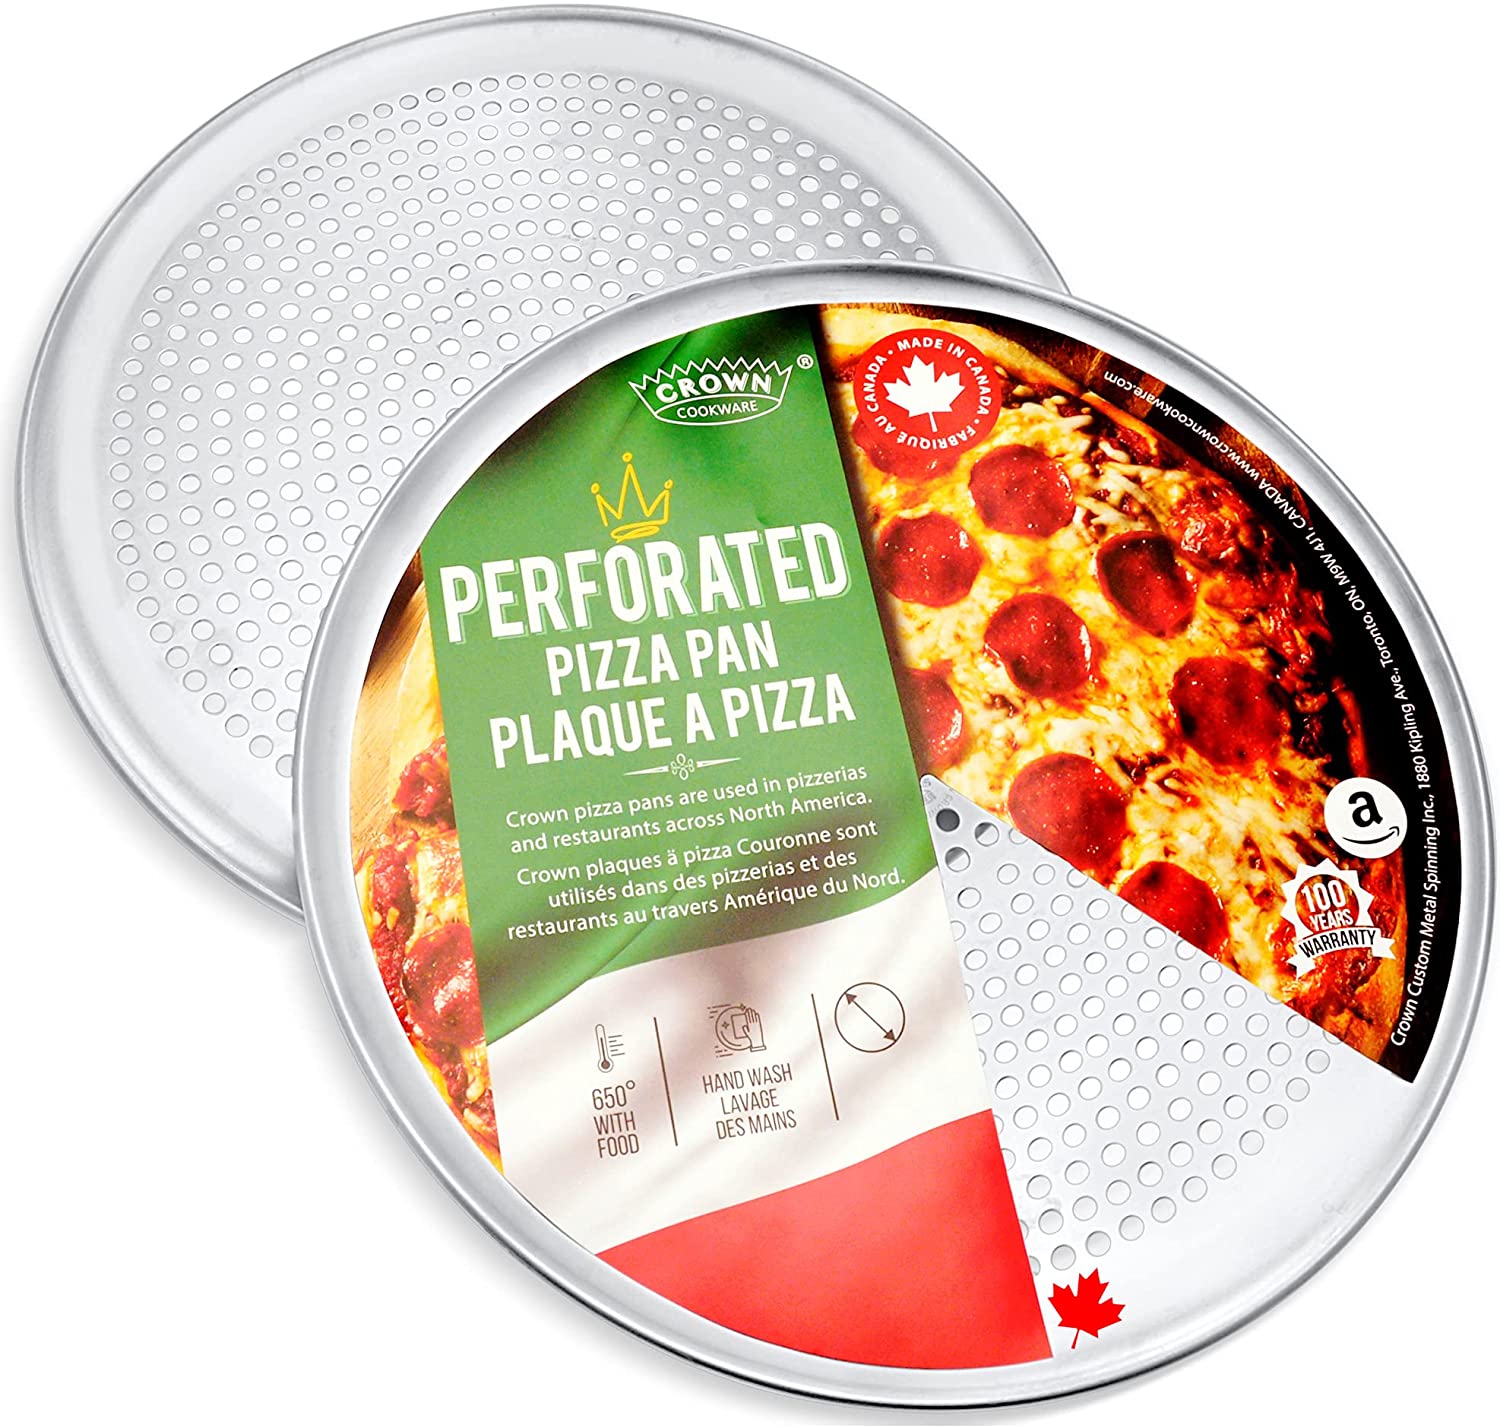 Perforated pizza pan.